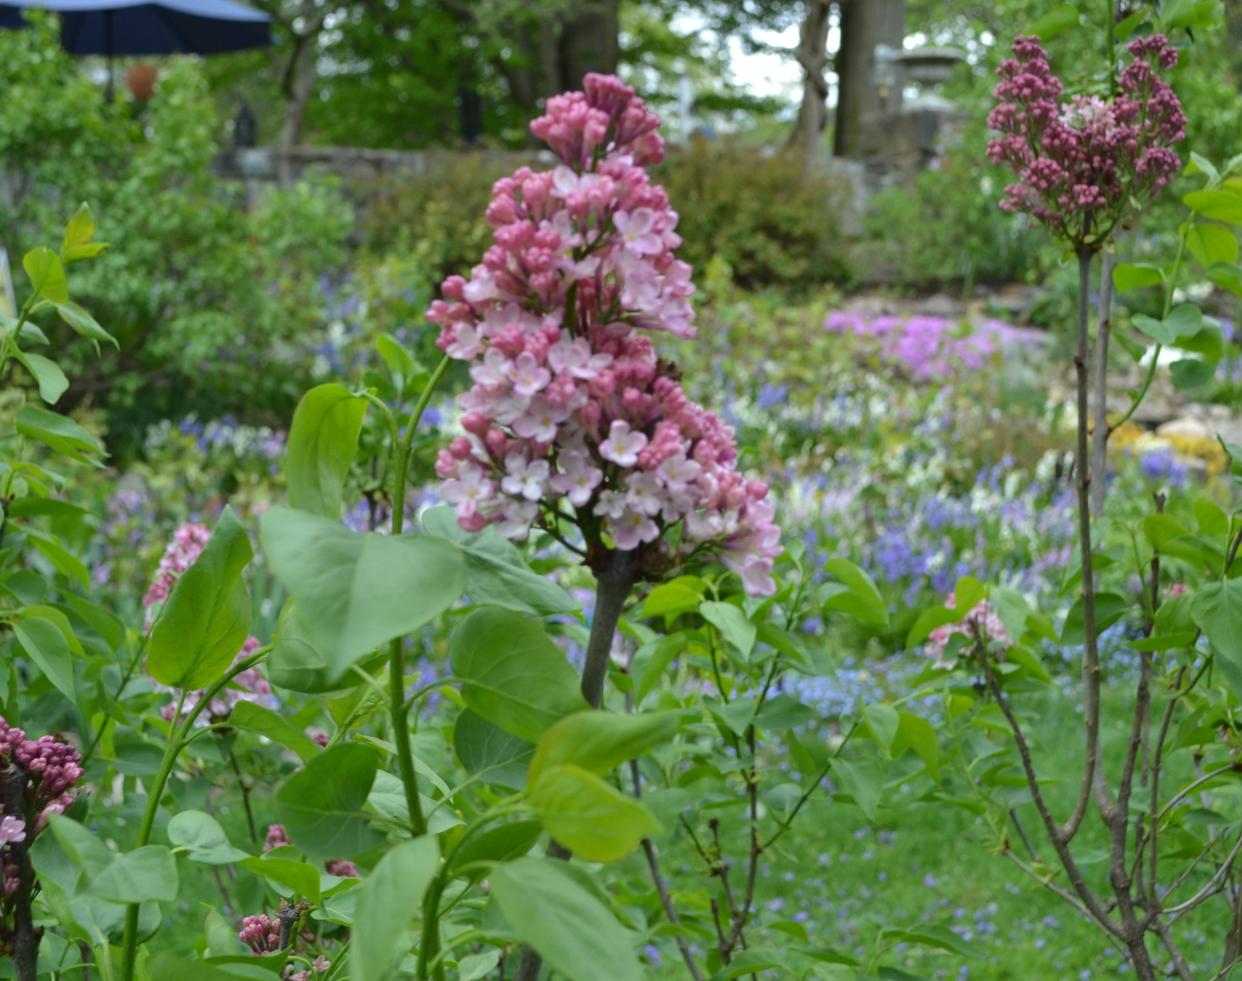 While lilacs are considered deer resistant, deer will nibble on them if no other food is available.